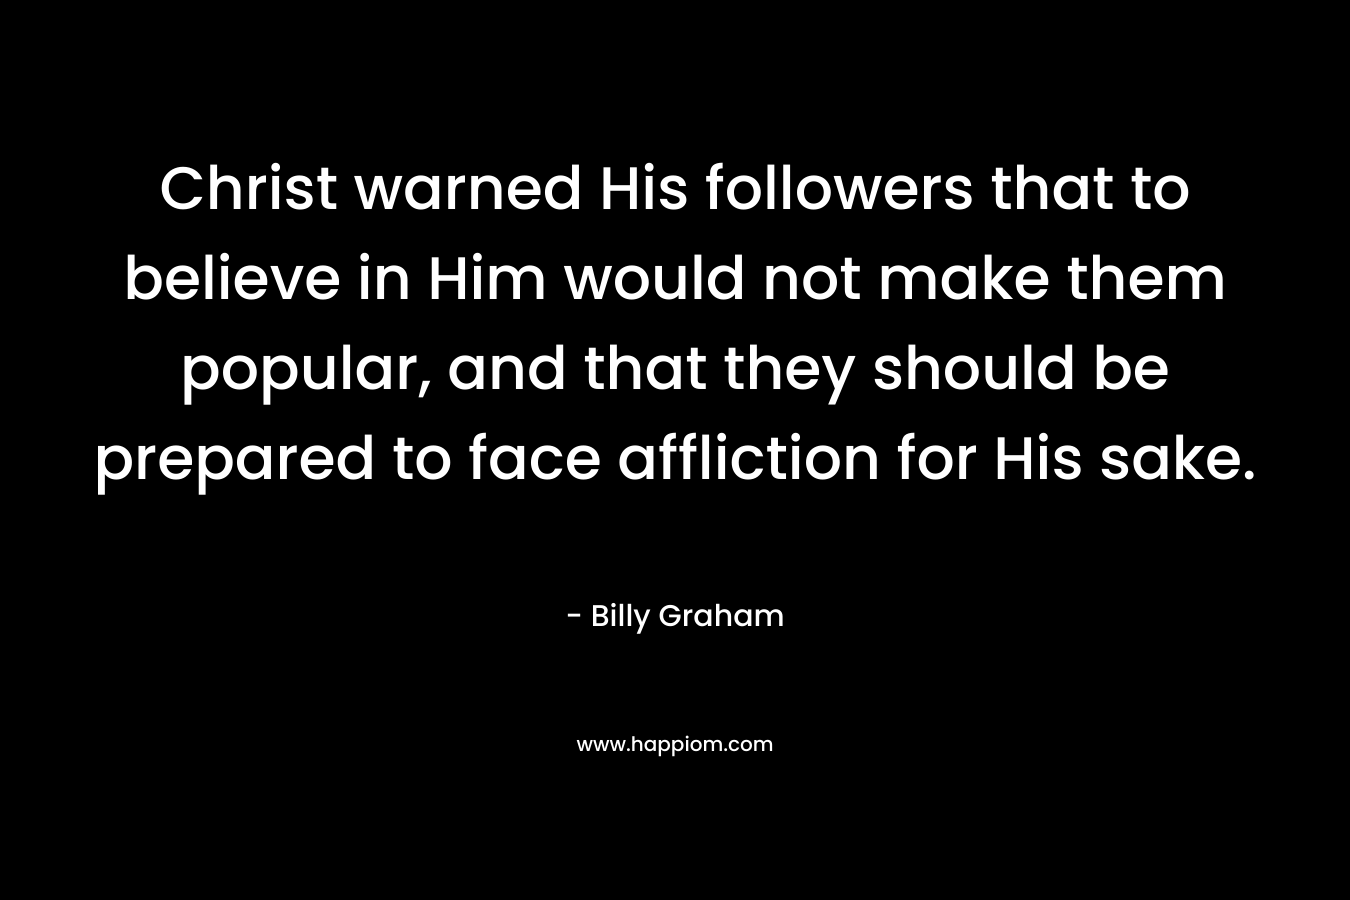 Christ warned His followers that to believe in Him would not make them popular, and that they should be prepared to face affliction for His sake.